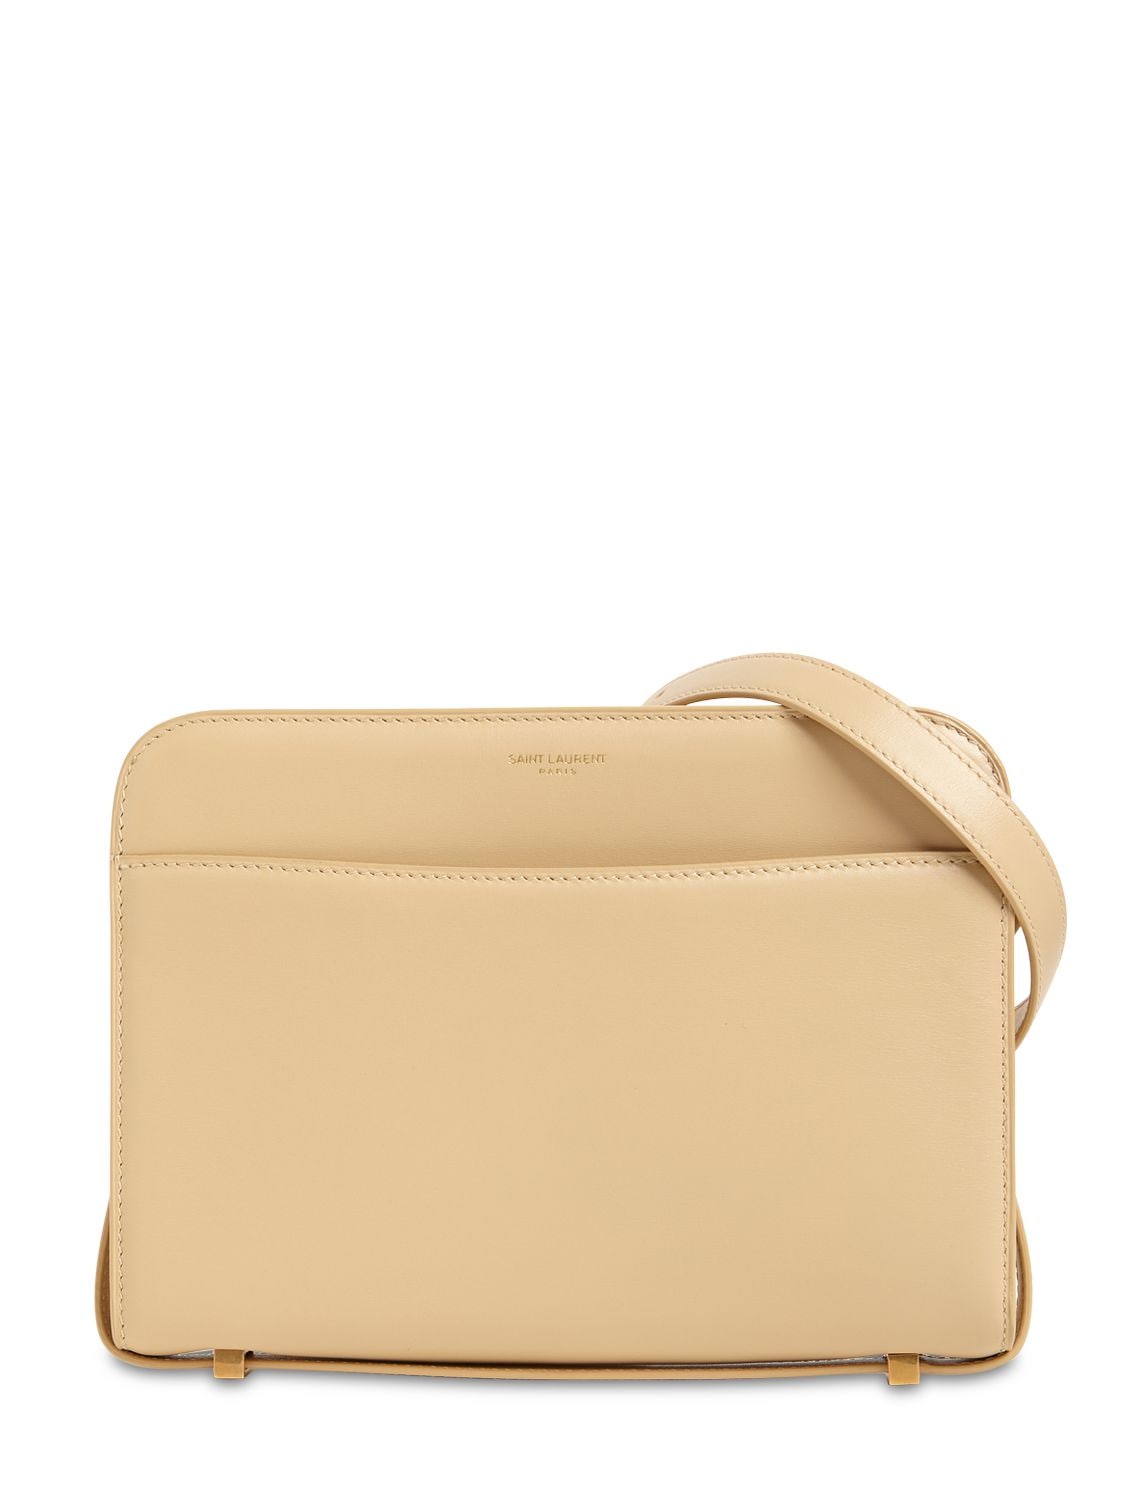 Saint Laurent Reversed Satchel Smooth Leather Bag In Ivory